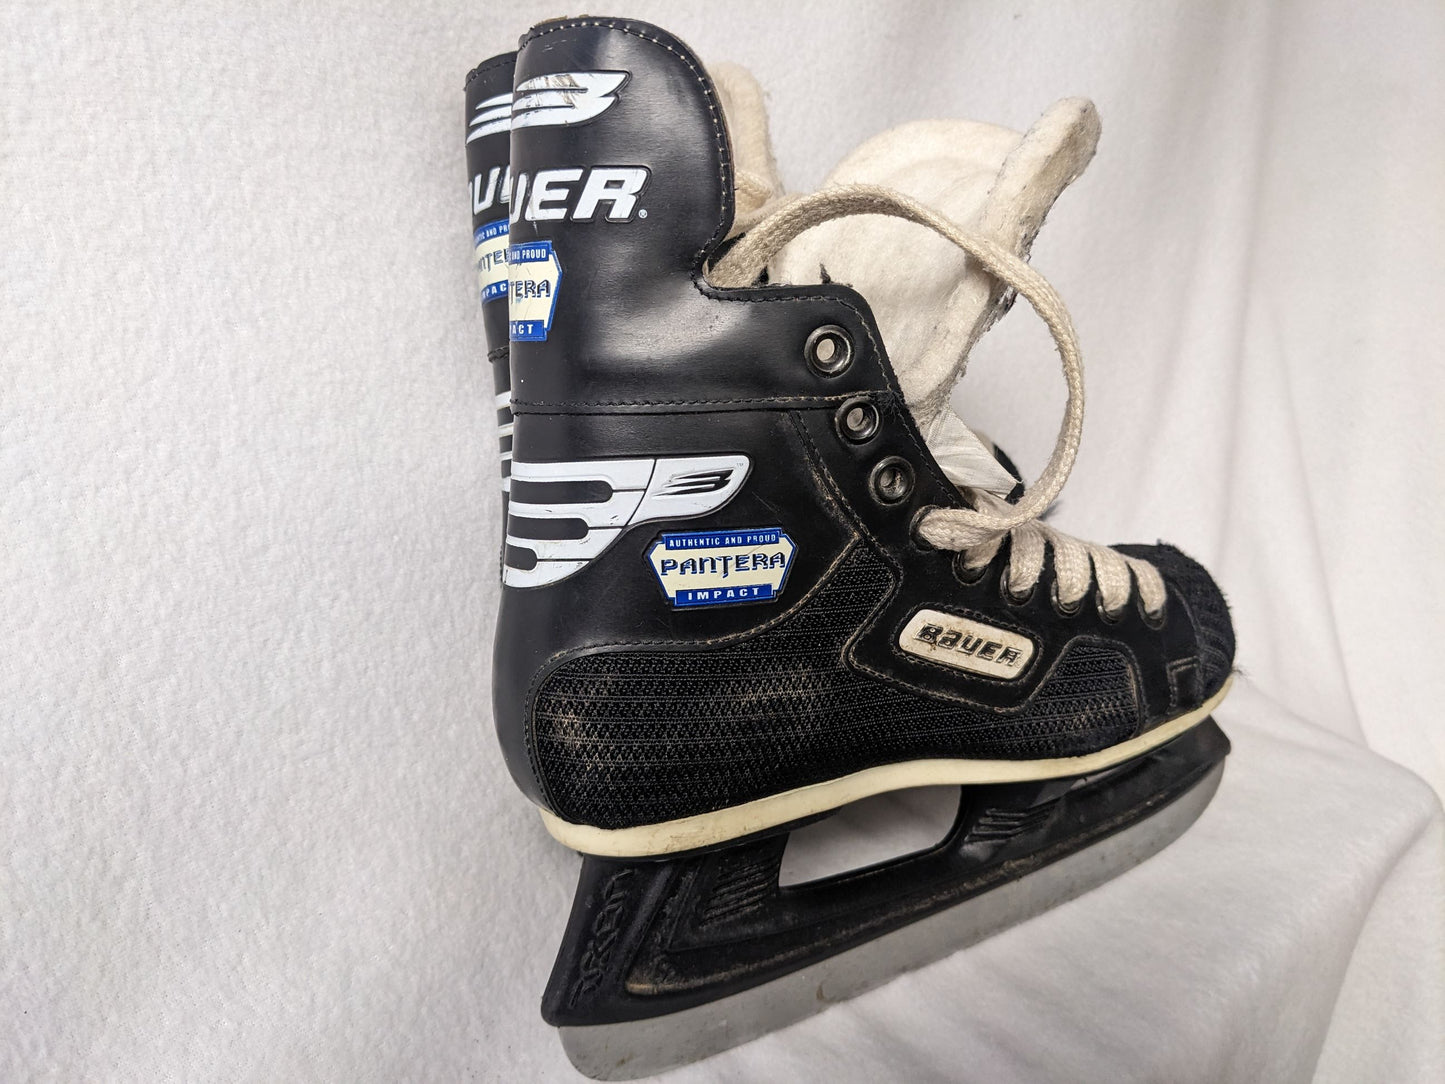 Bauer Pantera Impact Youth Hockey Ice Skates Size 2 Color Black Condition Used